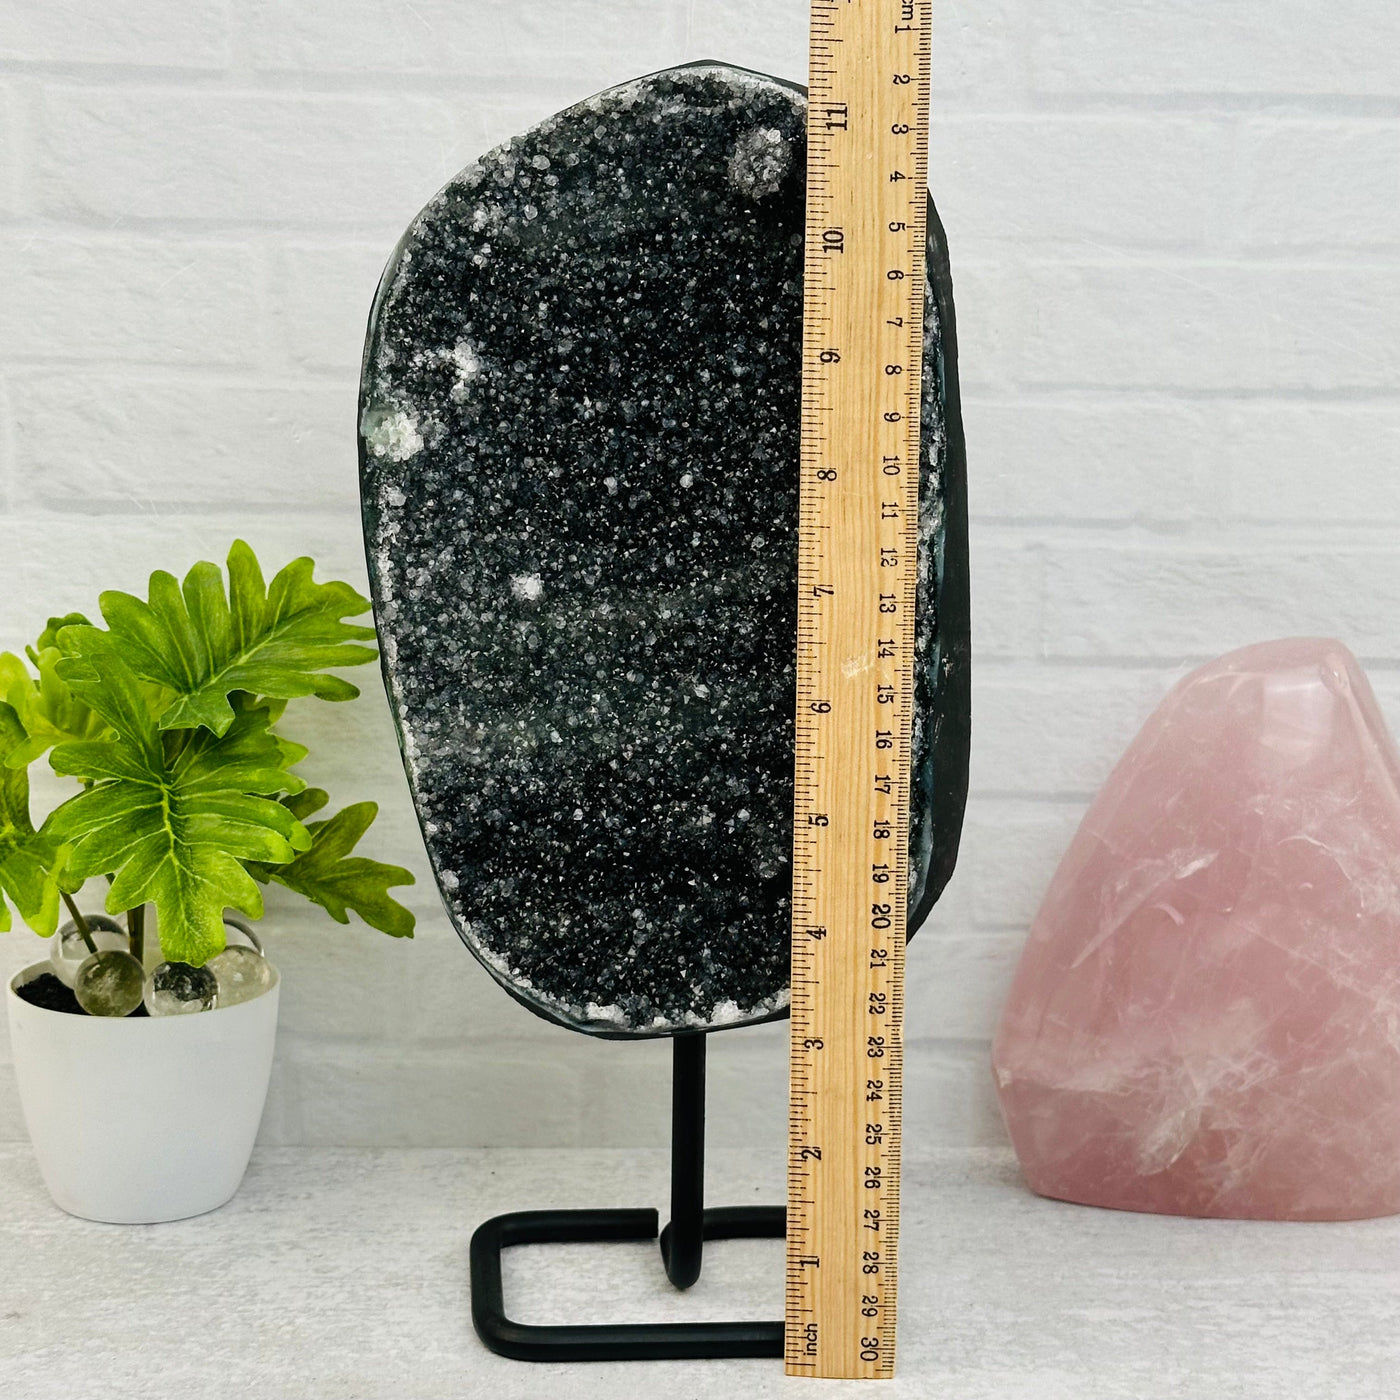 Black Amethyst Crystal Cluster on Metal Stand next to a ruler for size reference 